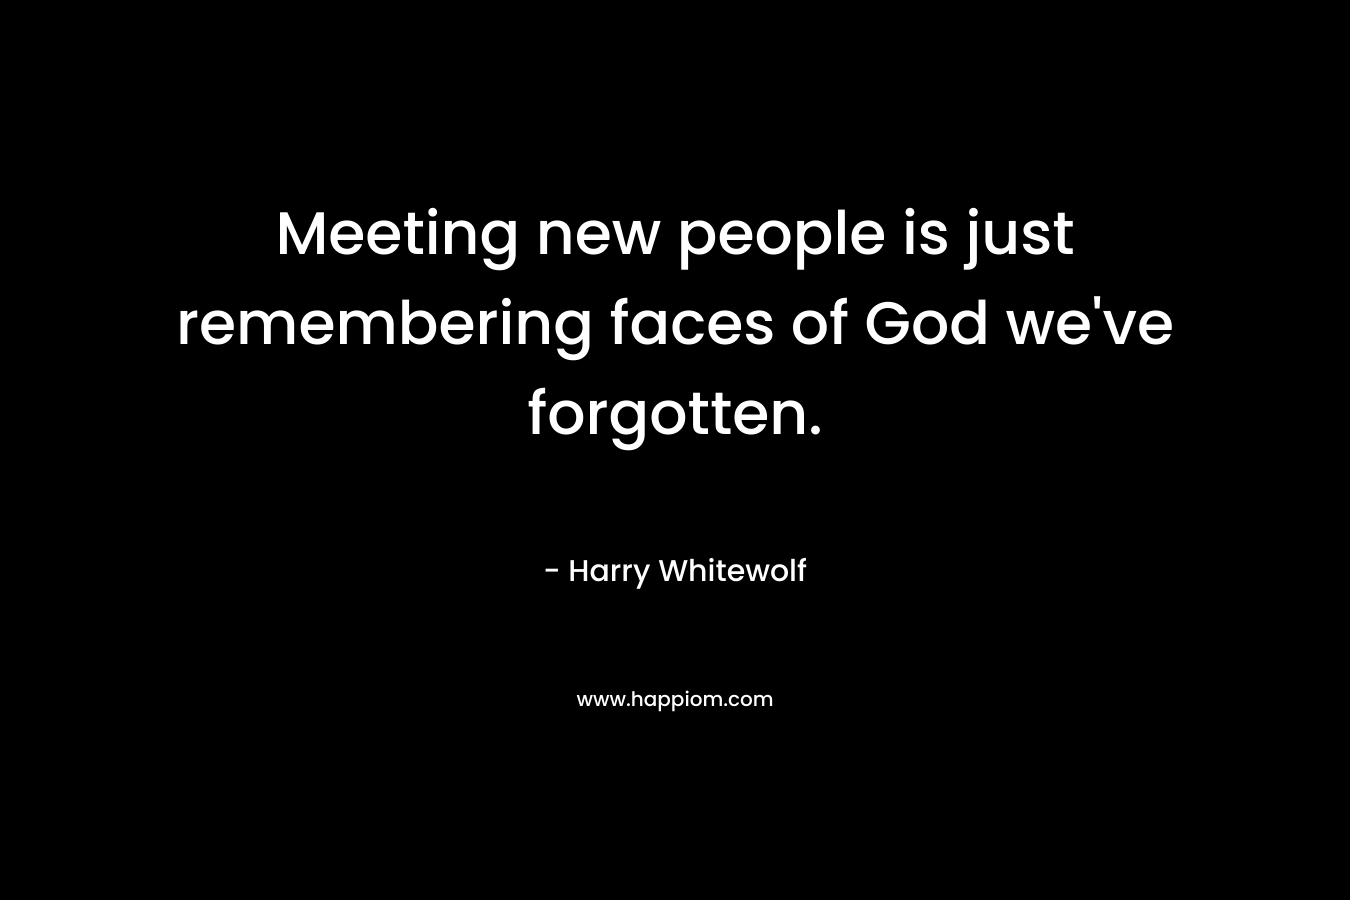 Meeting new people is just remembering faces of God we've forgotten.